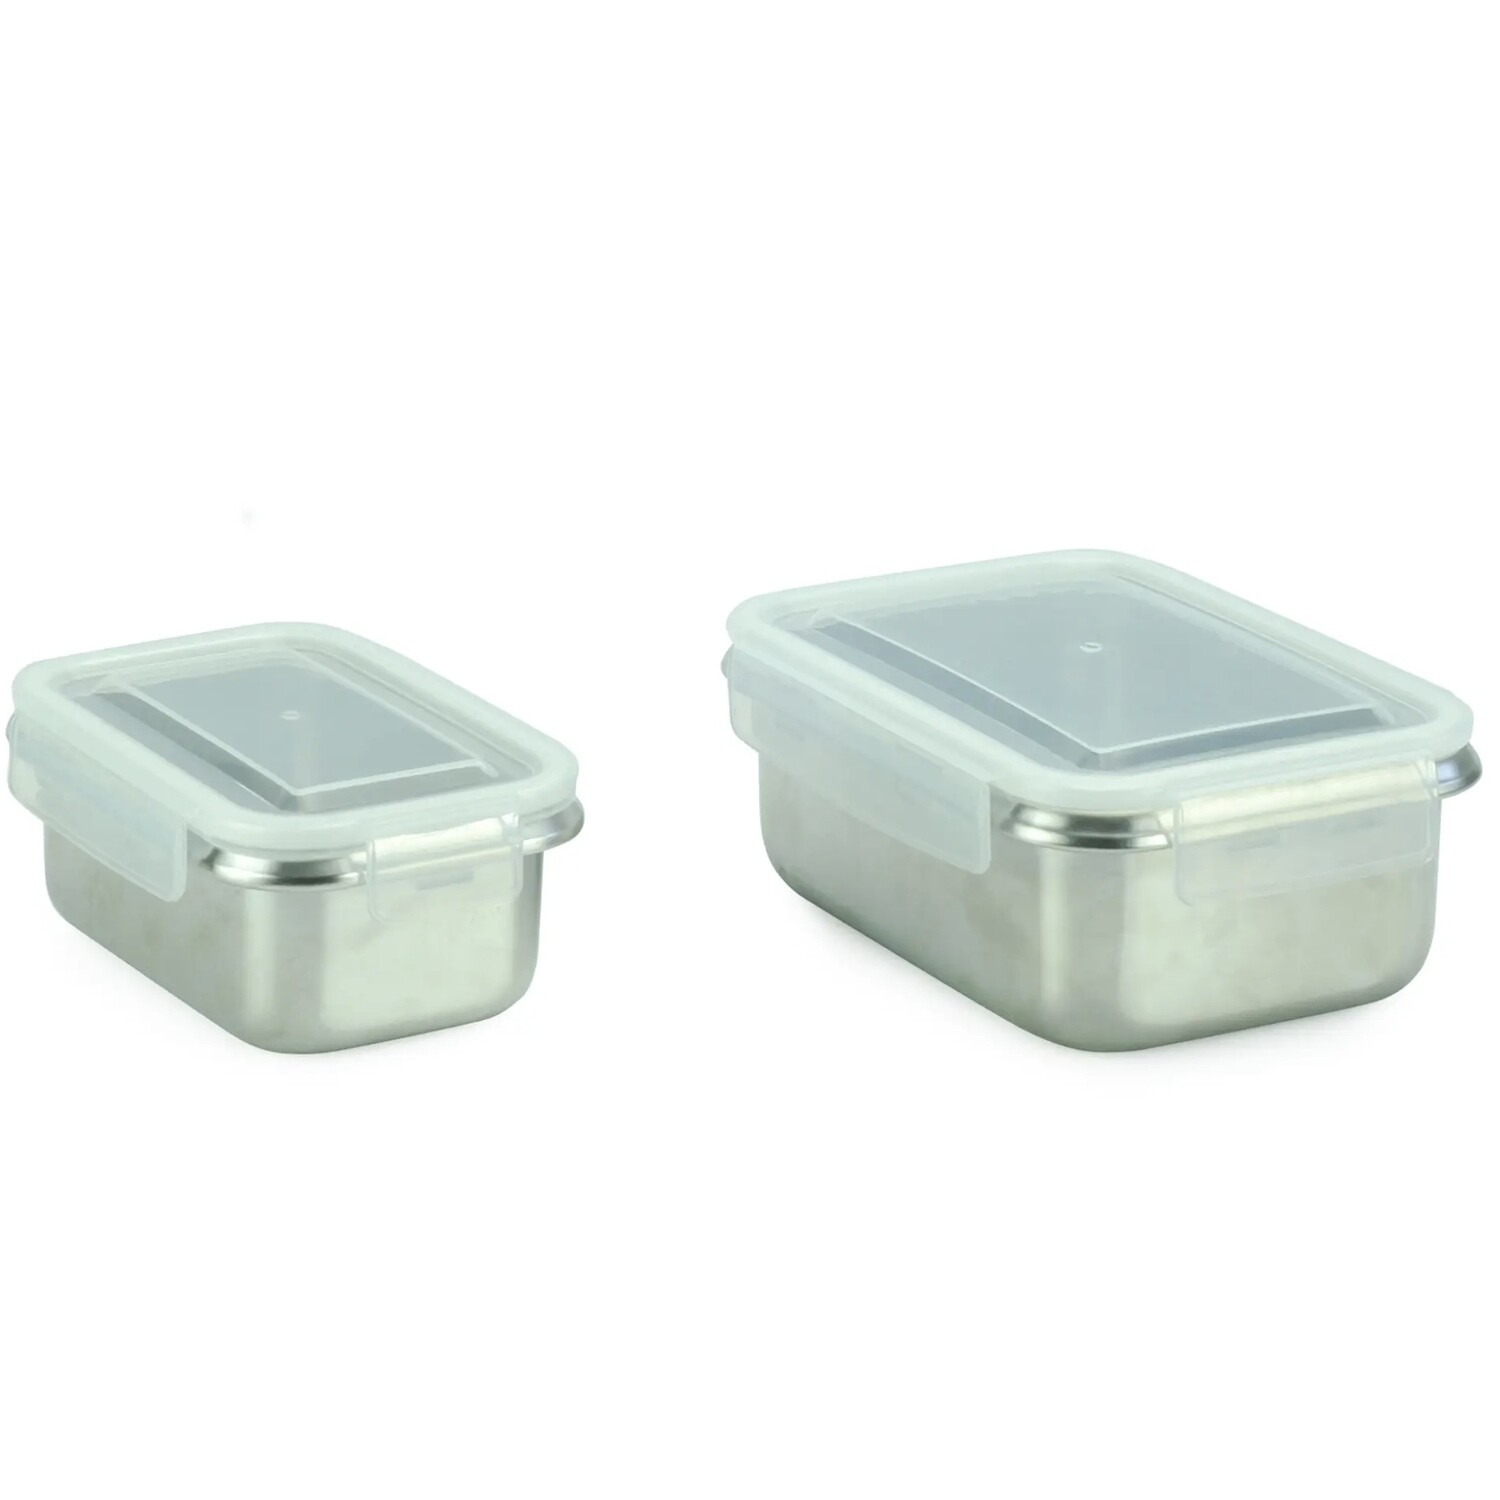 Minimal RT Stainless Steel Food Container (Set-2)  SALE ITEM 